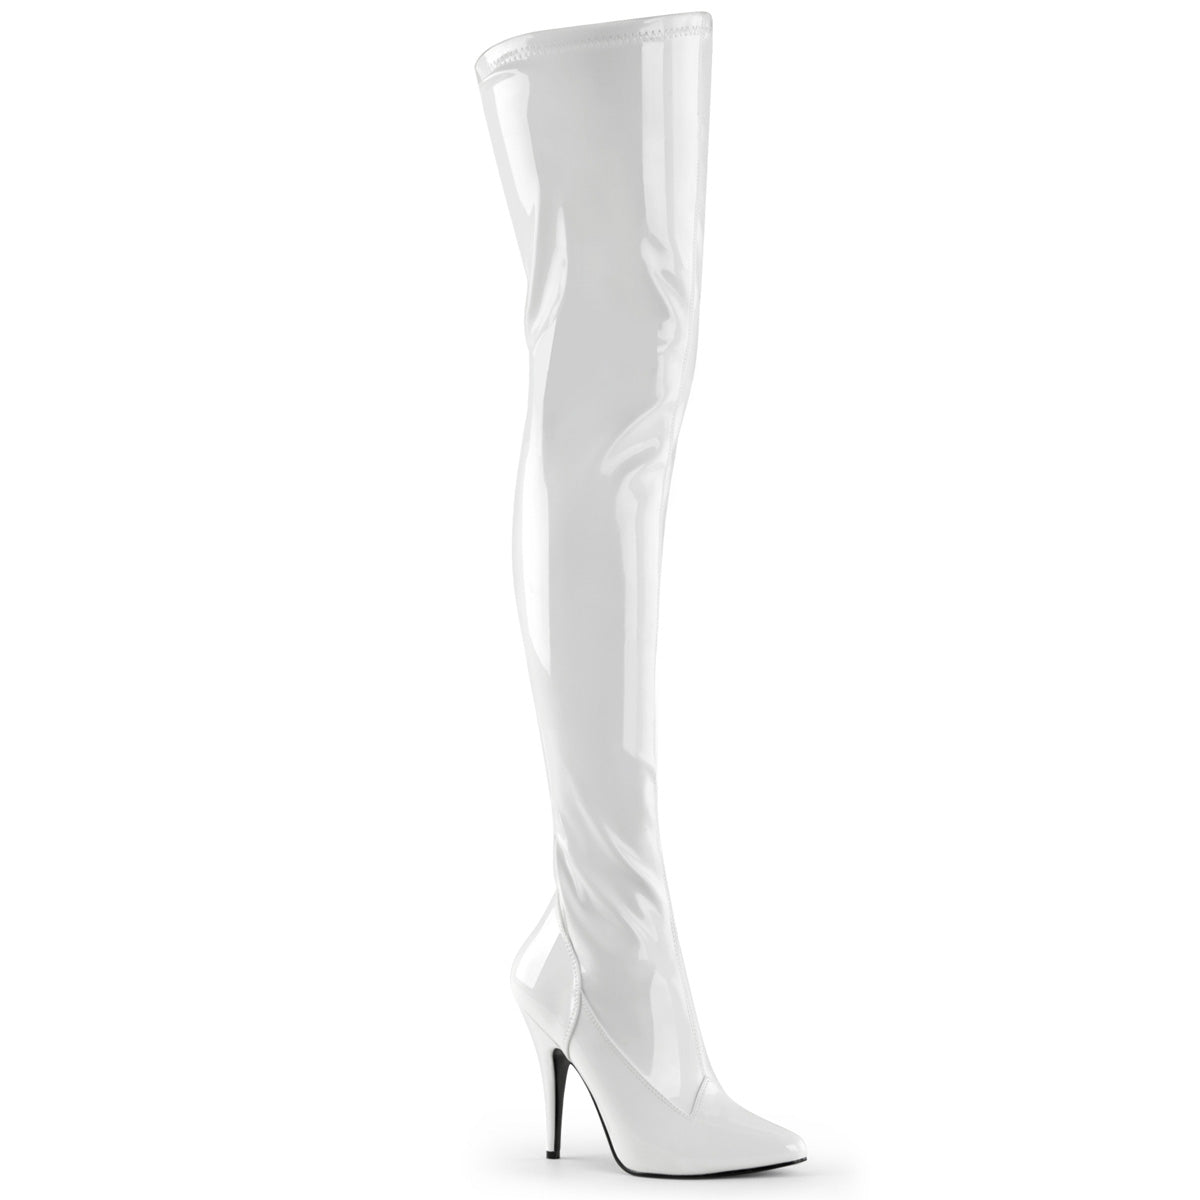 Clearance Pleaser Seduce 3000 White Patent Size 6UK/9USA - From Clearance Sold By Alternative Footwear